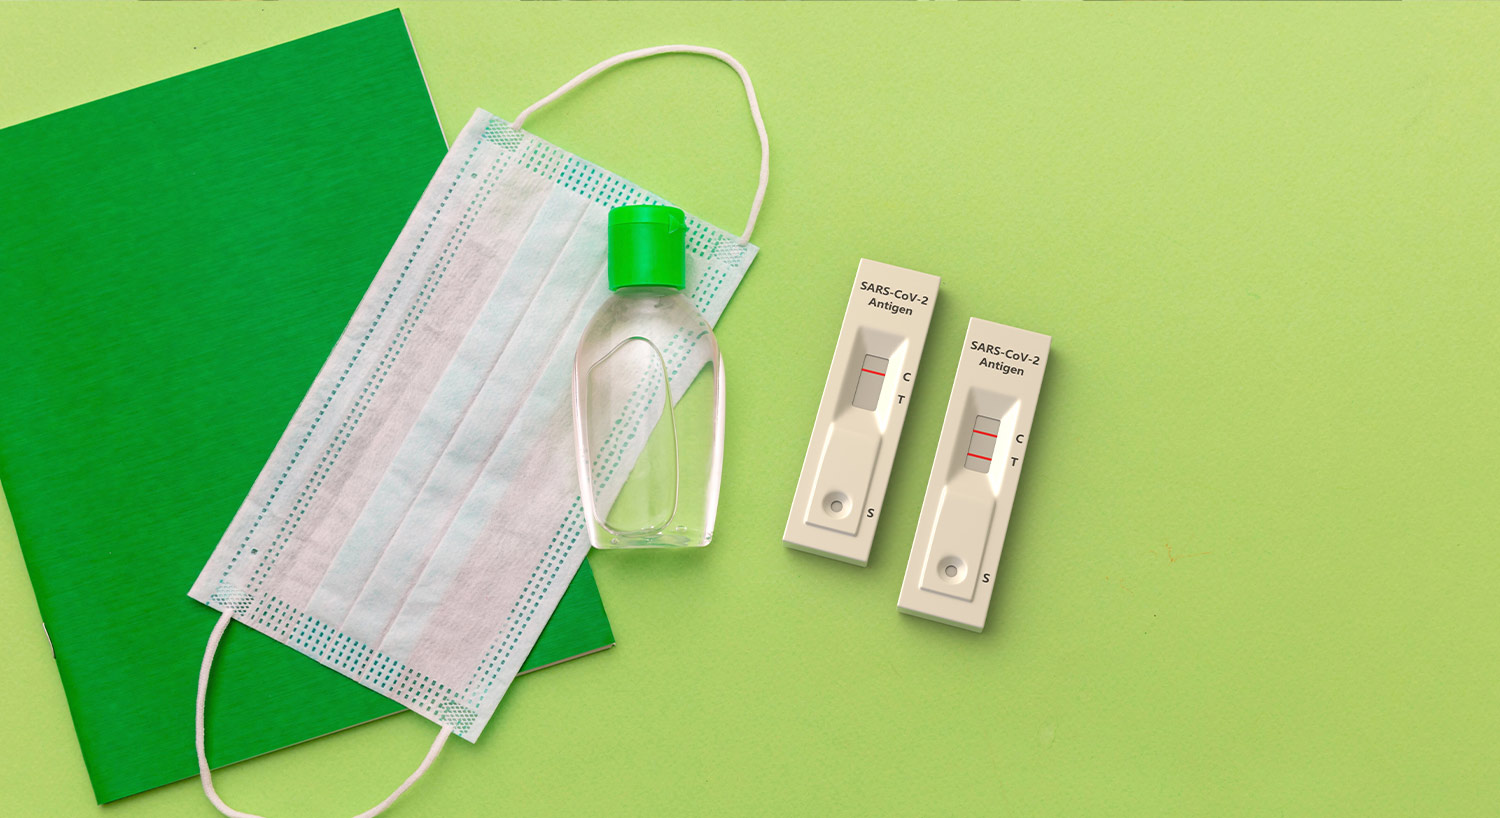 a face mask, hand sanitizer and two COVID tests on a green background